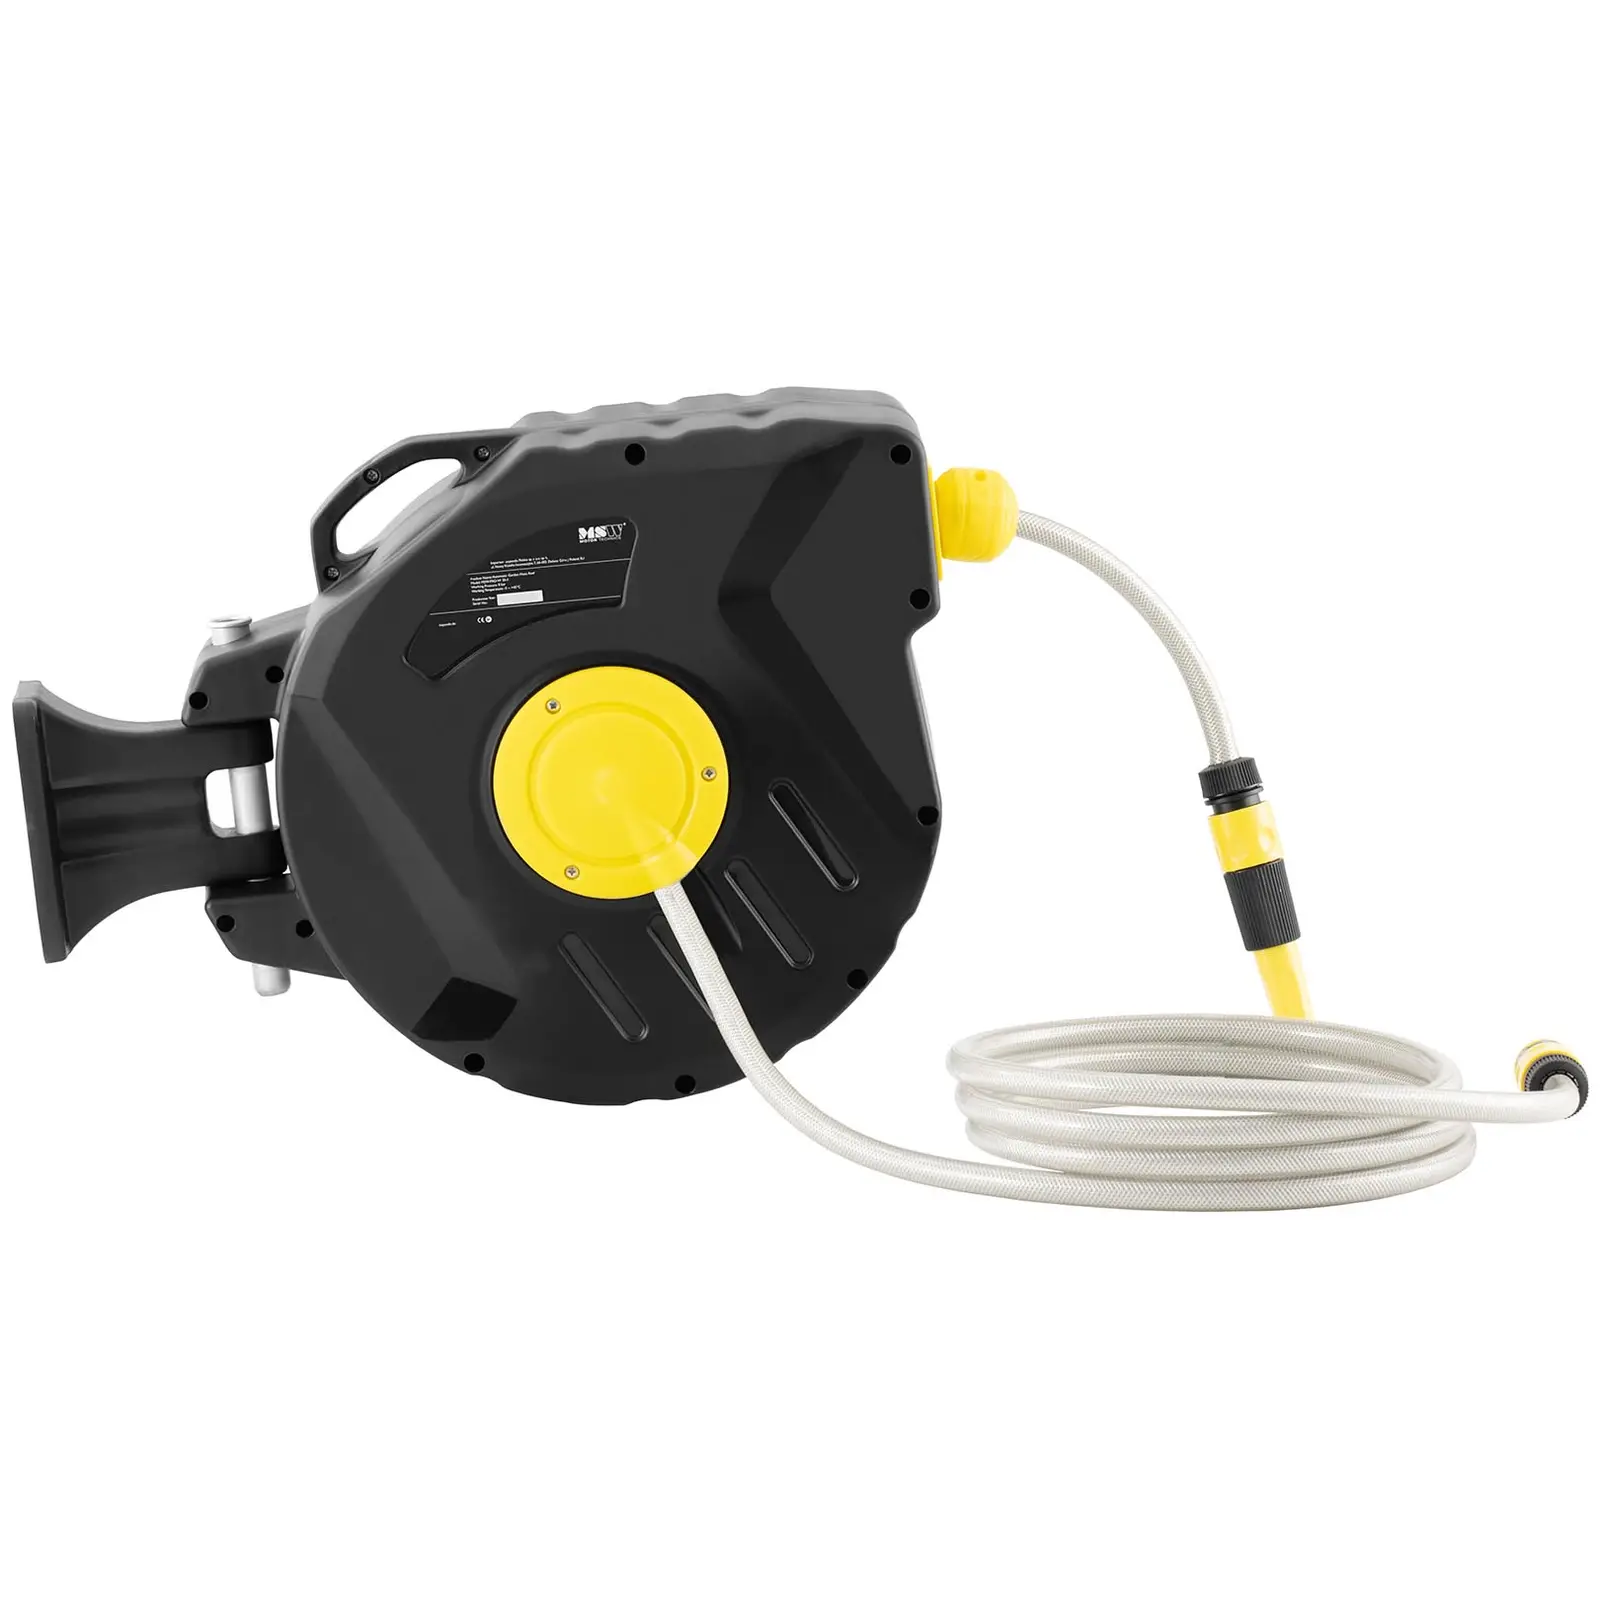 Water Hose Reel - automatic - 20 + 3 m - 8 bar